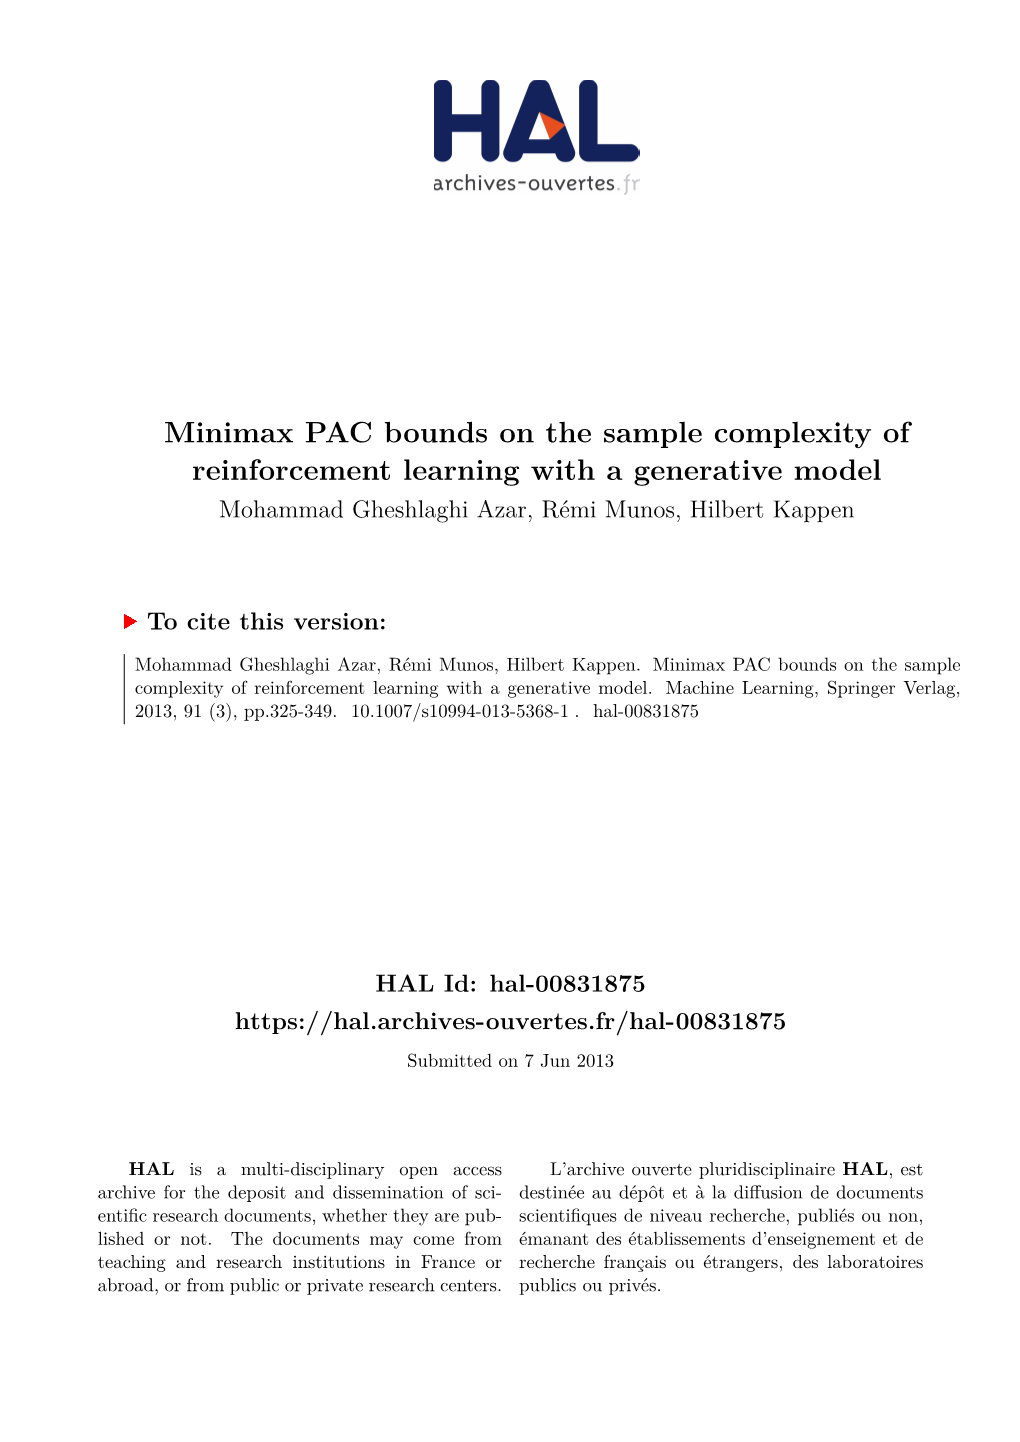 Minimax PAC Bounds on the Sample Complexity of Reinforcement Learning with a Generative Model Mohammad Gheshlaghi Azar, Rémi Munos, Hilbert Kappen